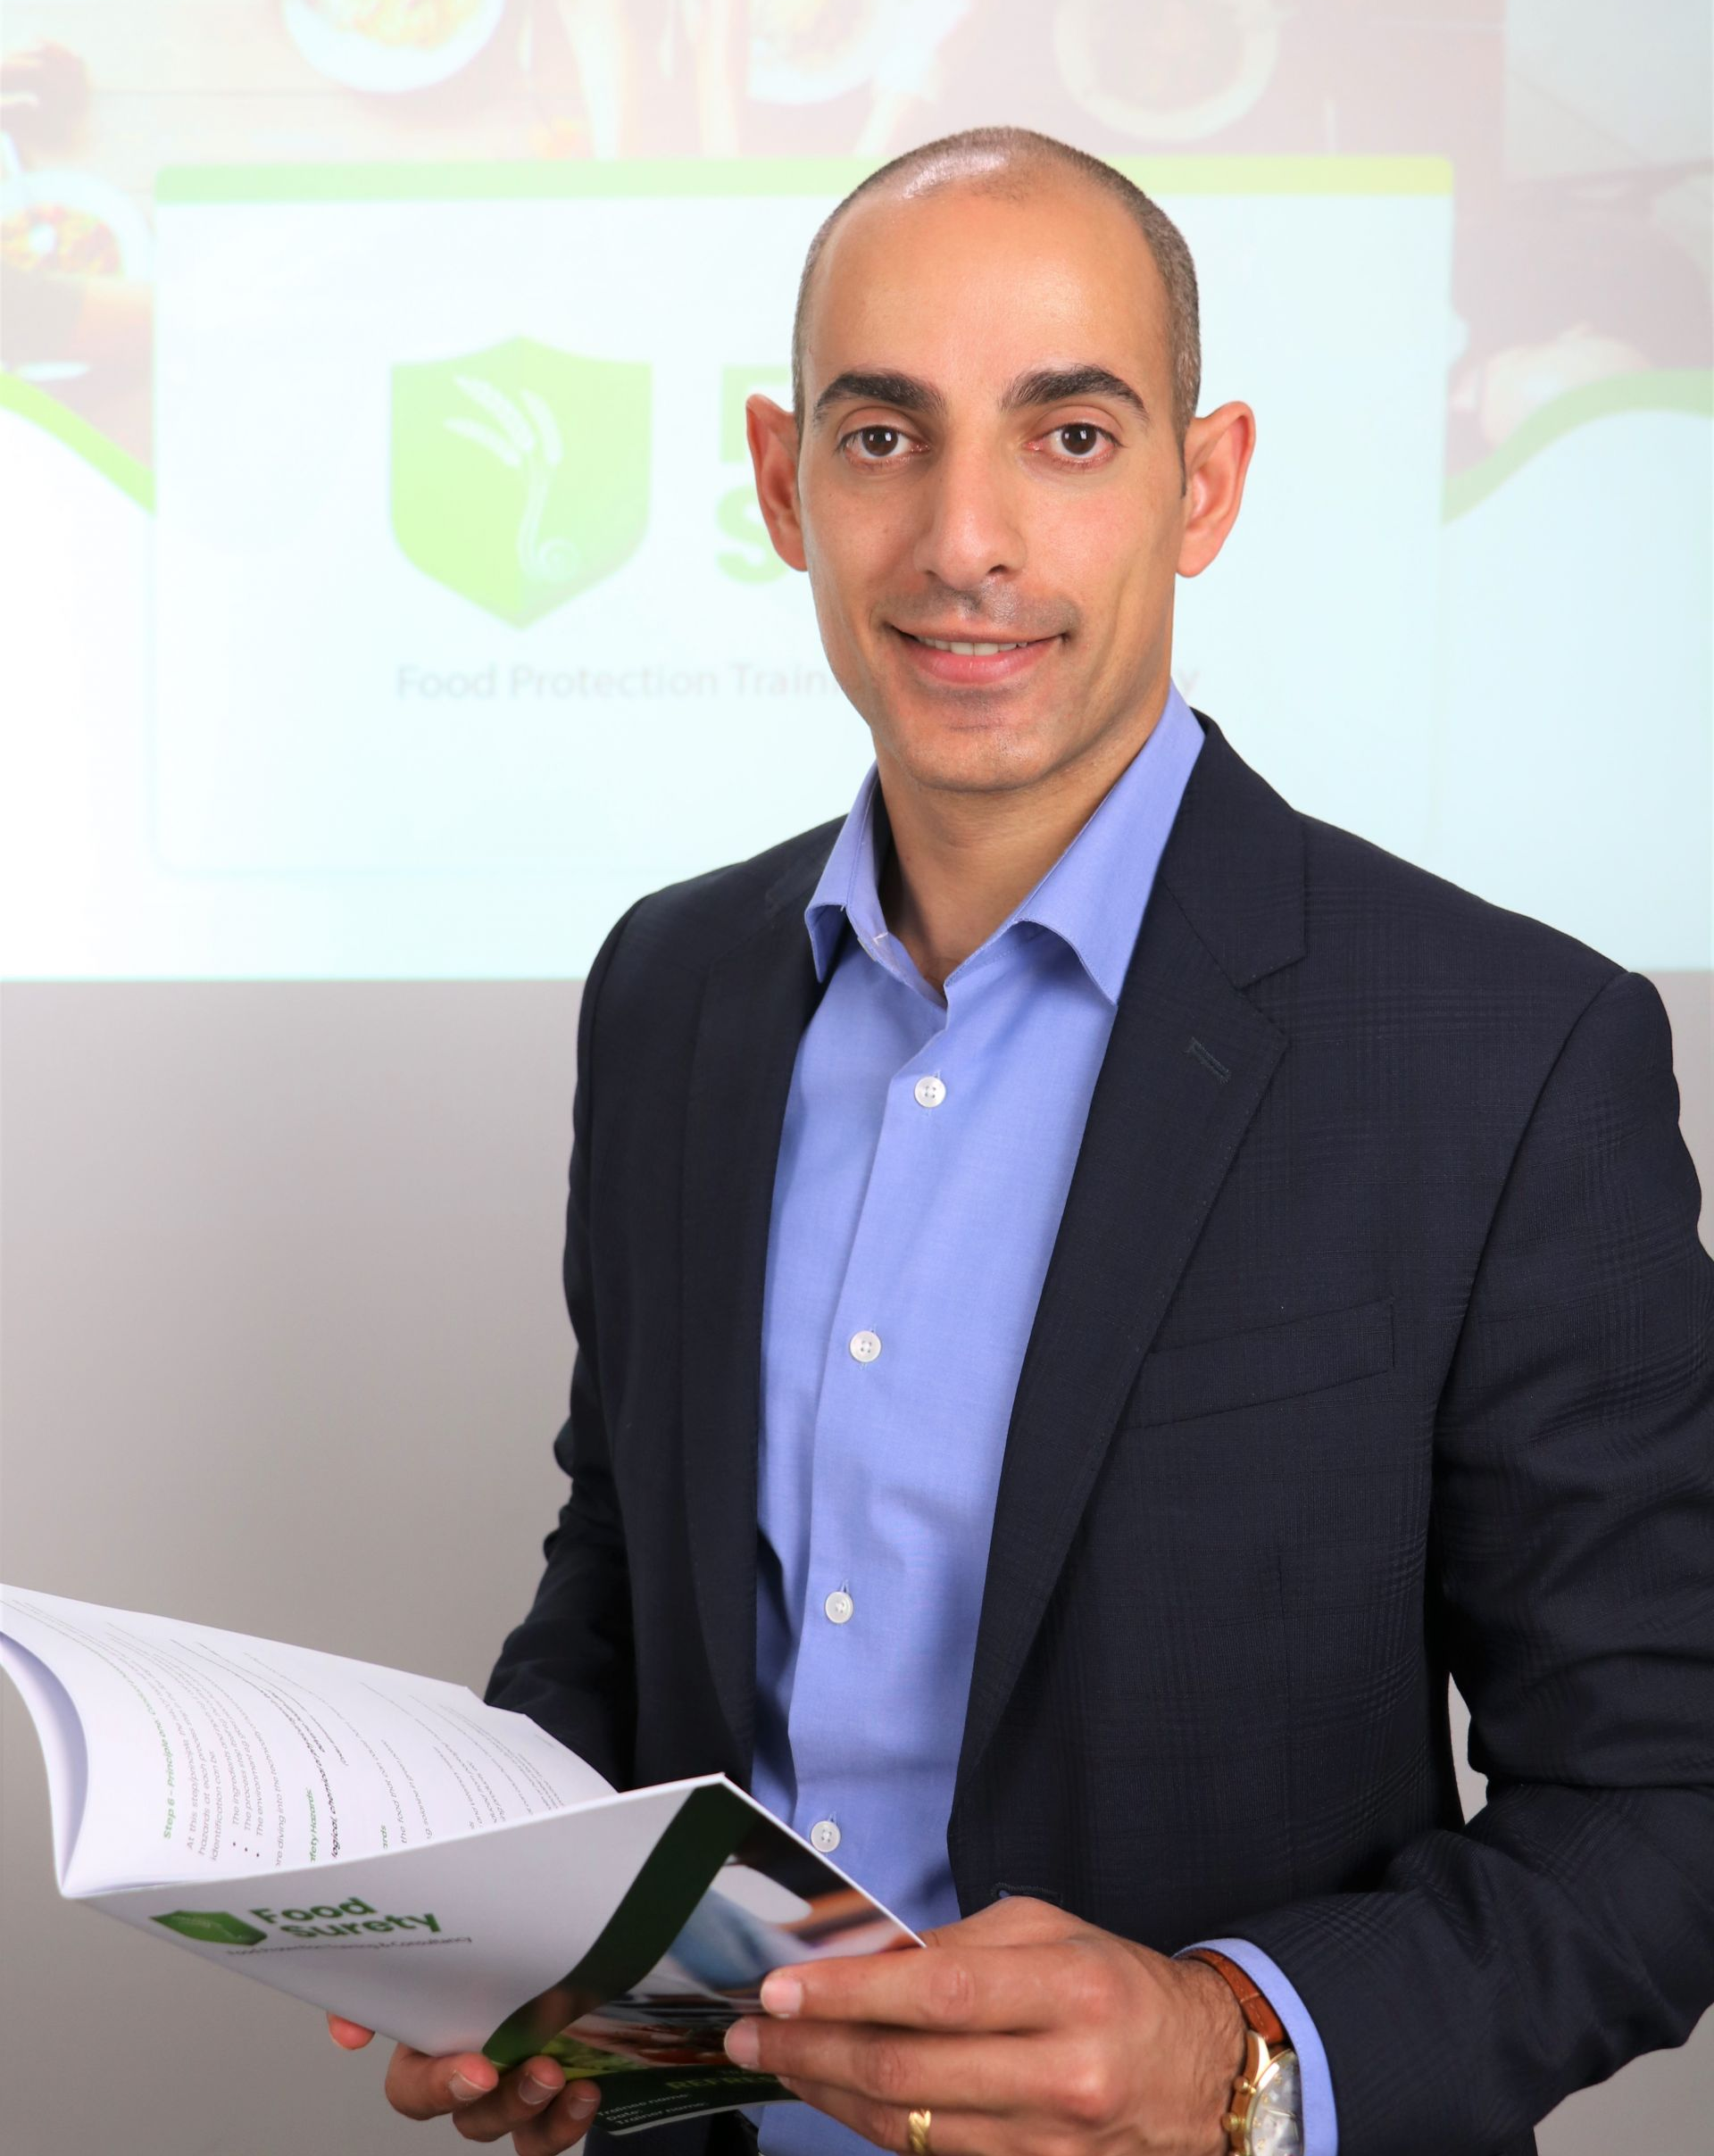 Ray Haddad delivering food fraud training certificate elearning in New Zealand 